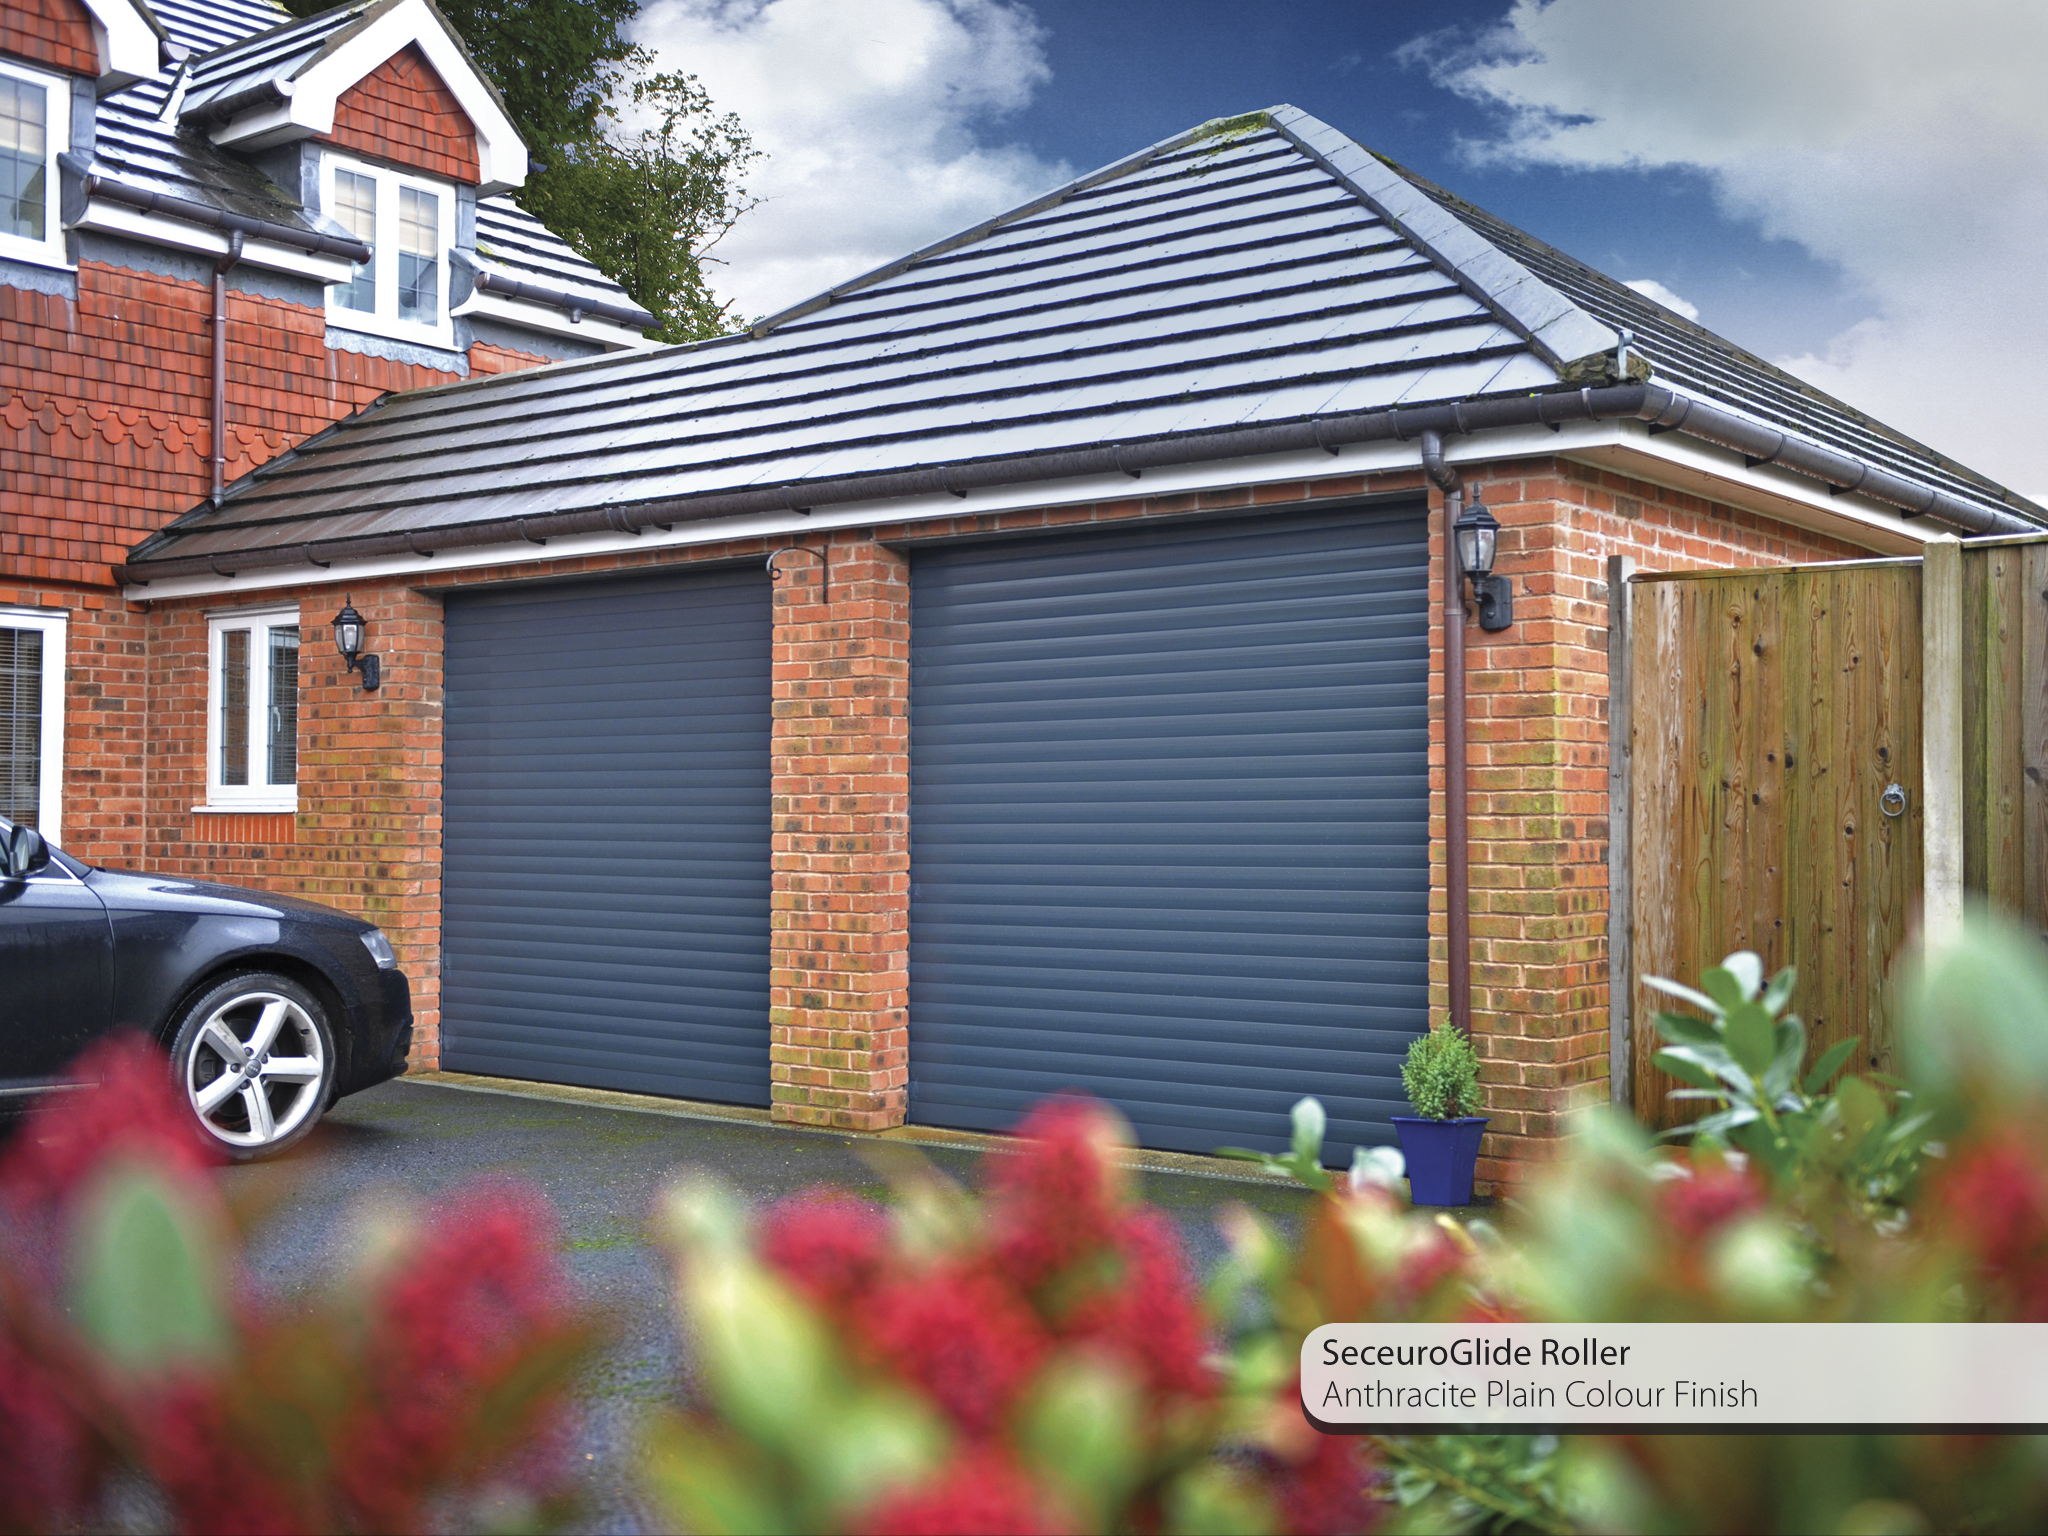 Seceuroglide Classic garage roller doors with remote control operation and a modern anthracite powder coated paint finish.